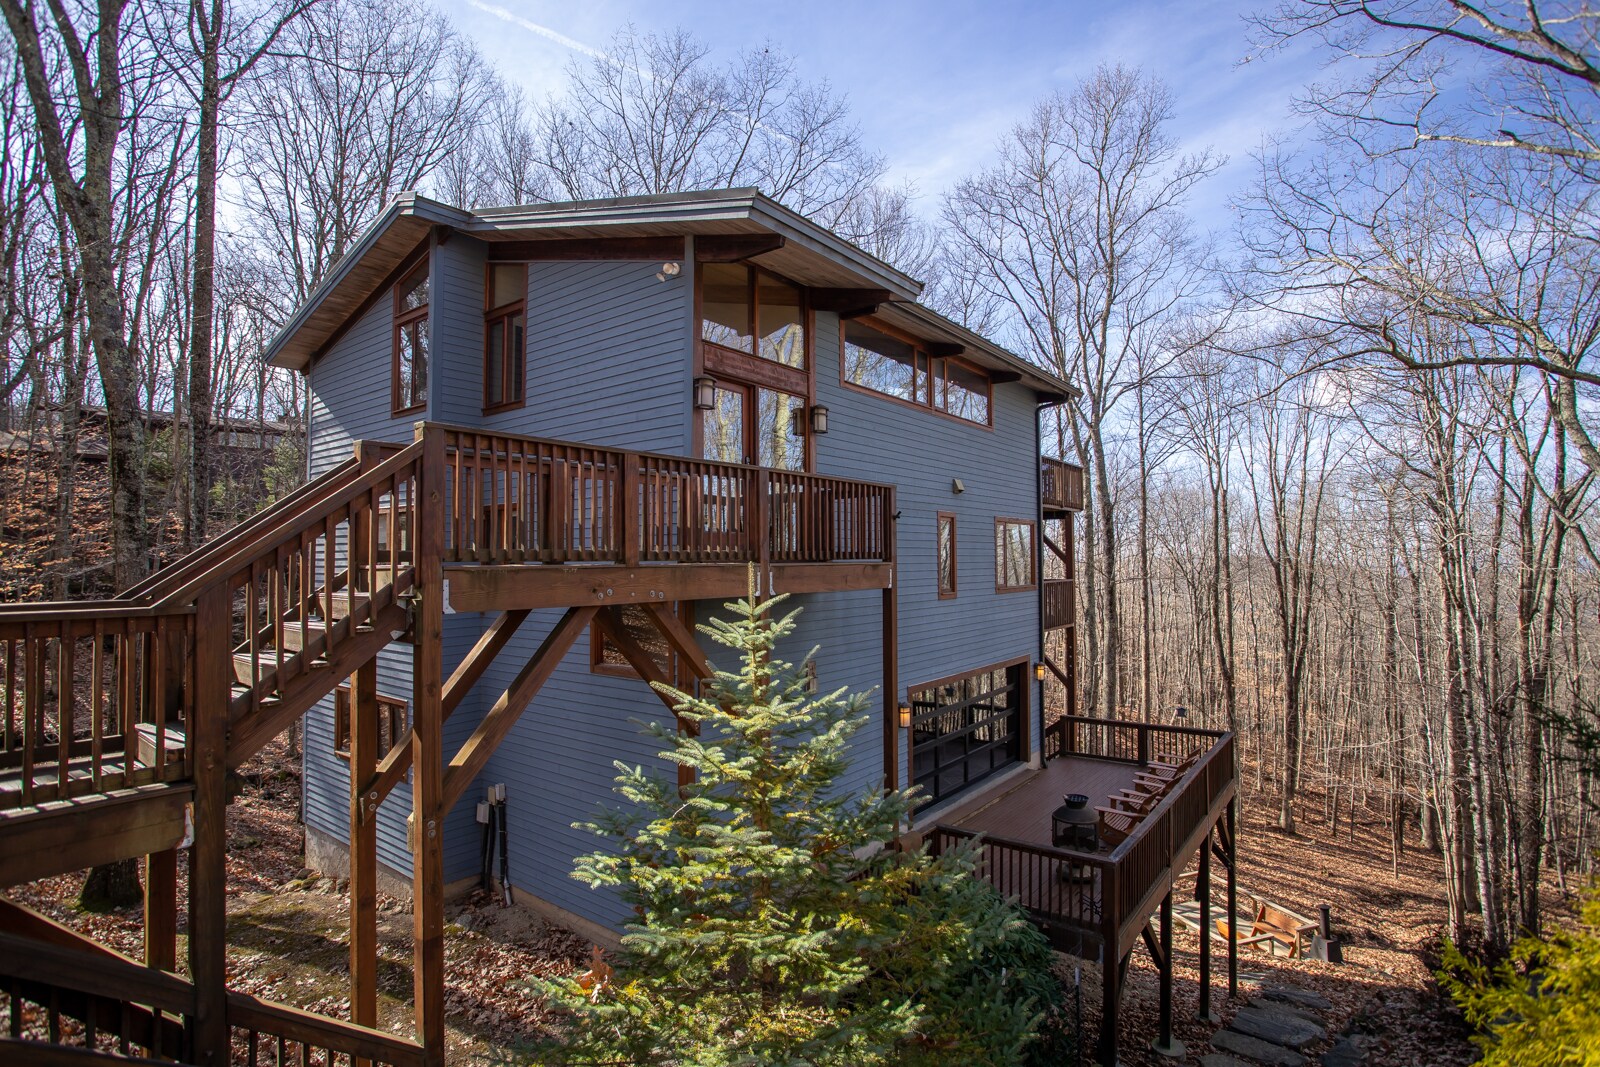 Blue Eagle Lodge boasts 4 Levels, 4 Large Suites, Multiple Living and Entertaining areas, and Numerous Outdoor Decks and Patios!